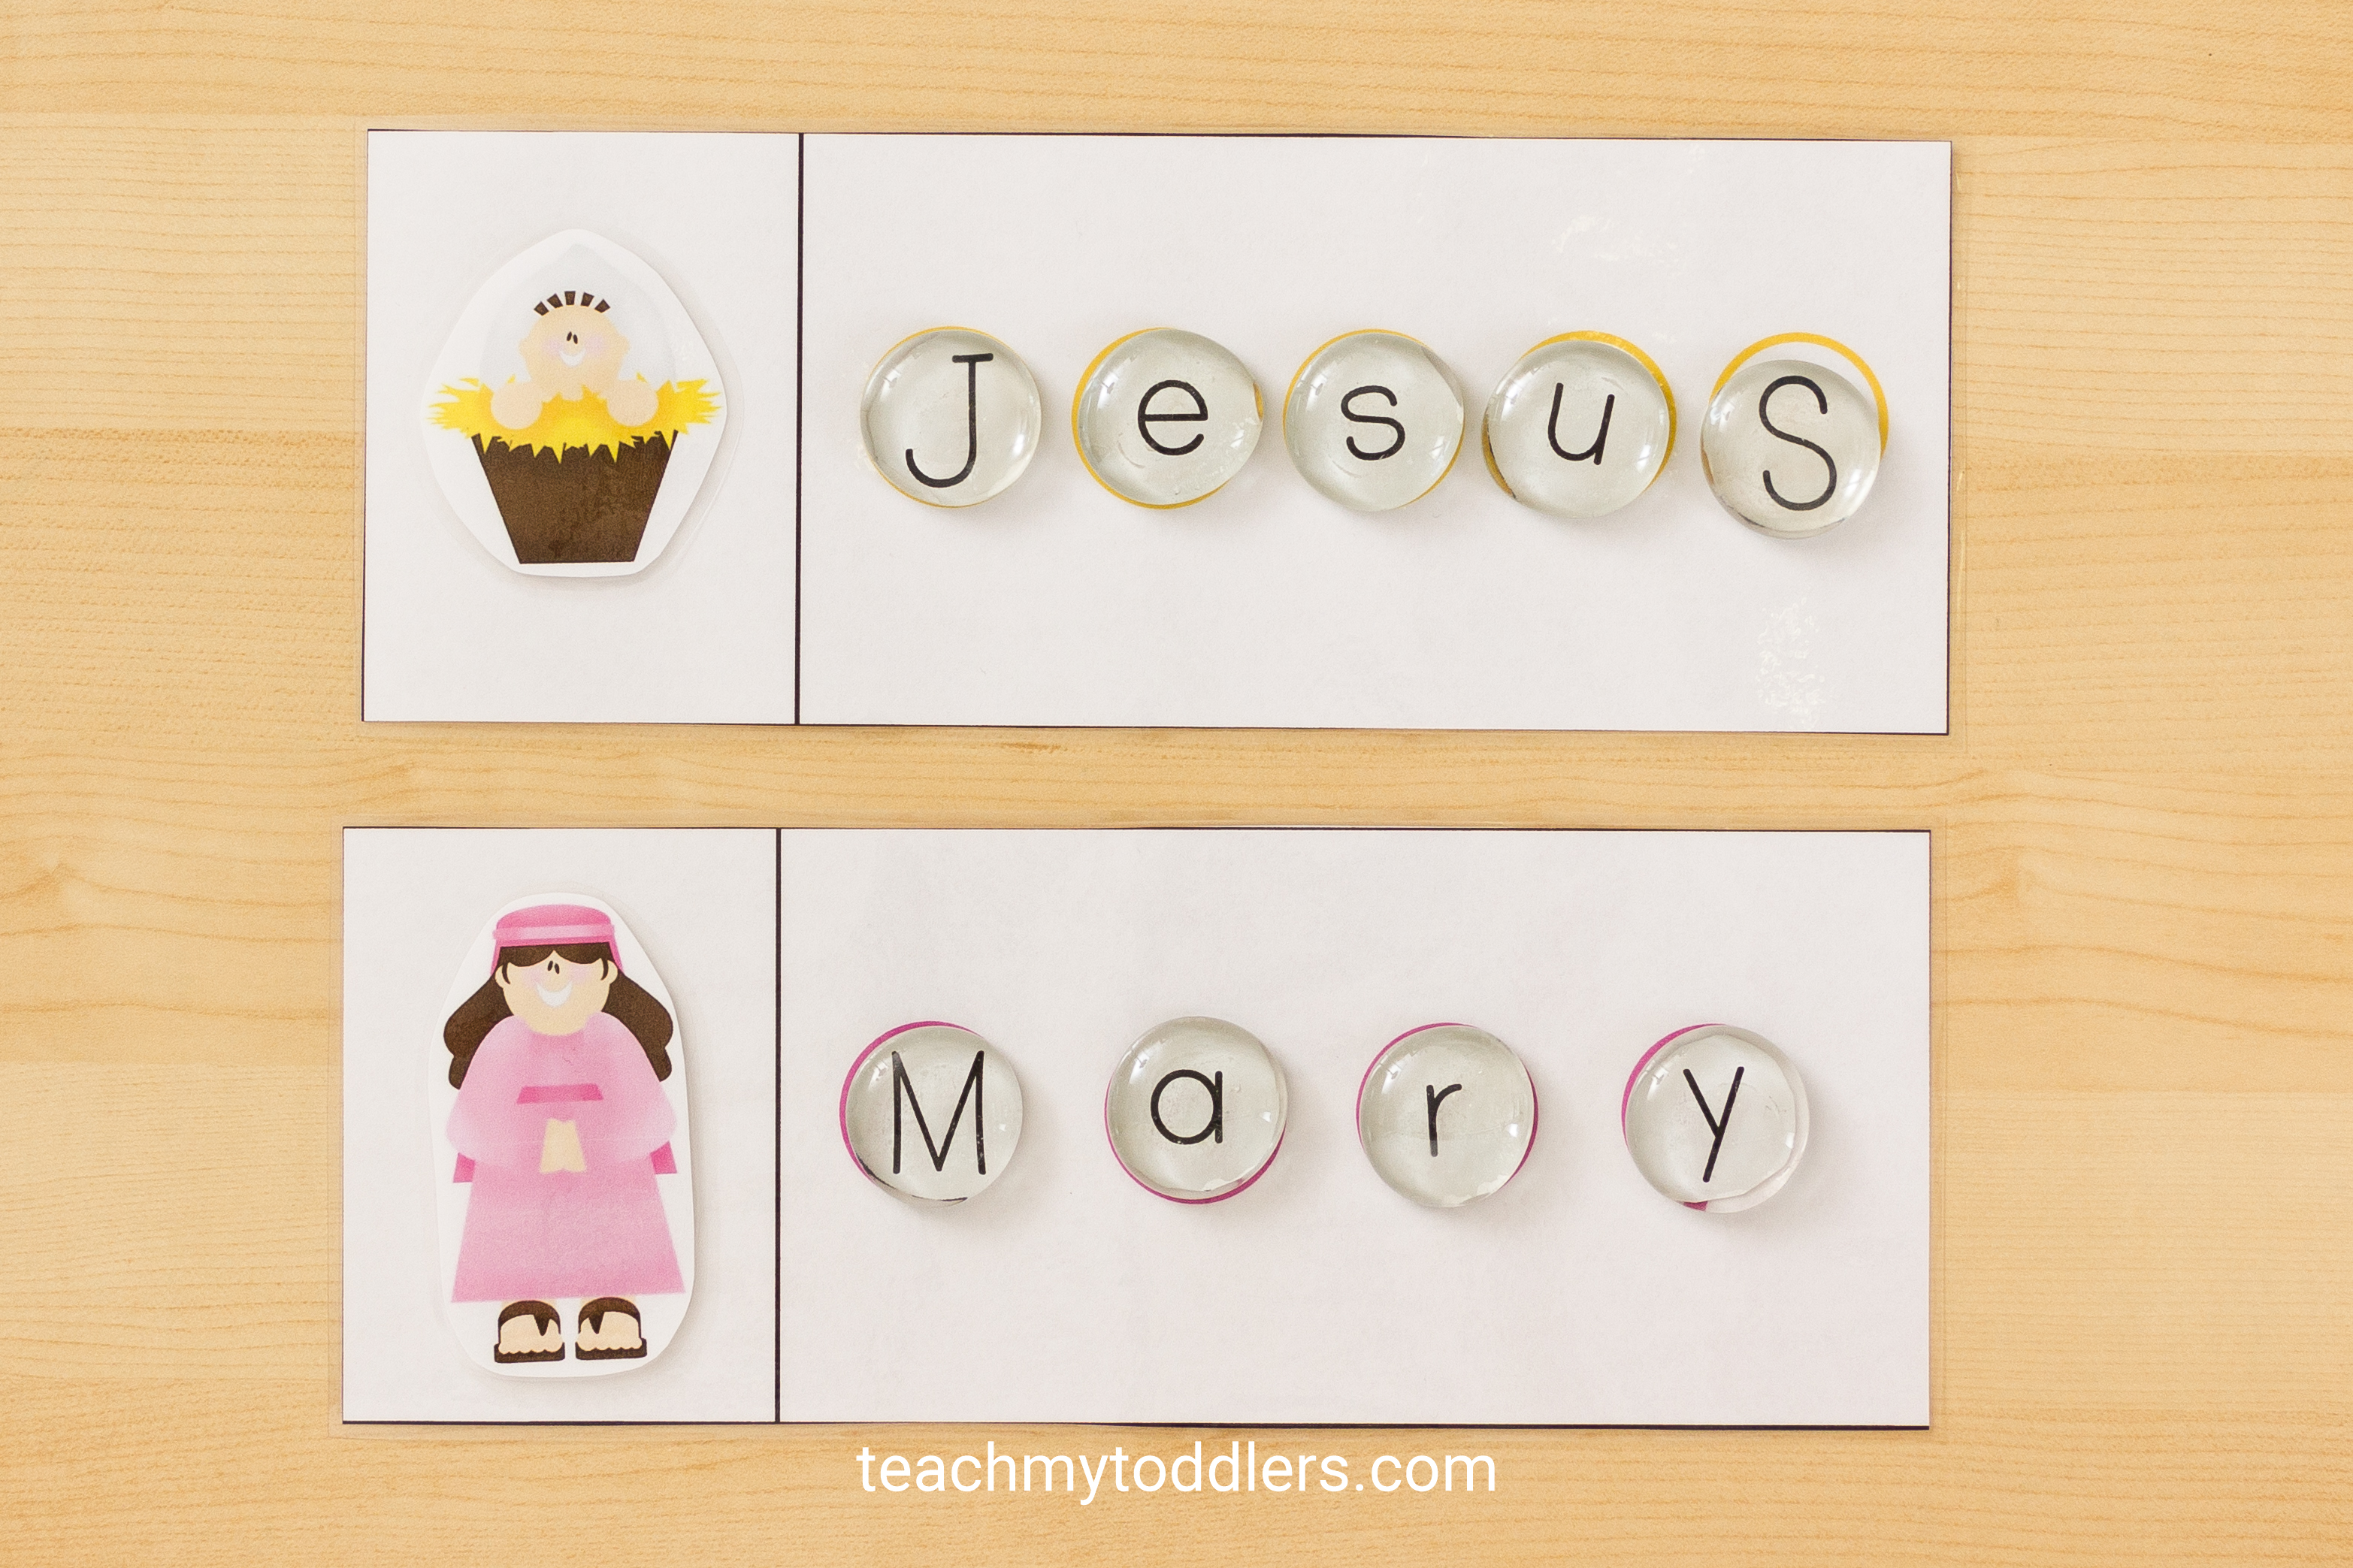 Discover how to use this fun nativity word cards activity for preschoolers